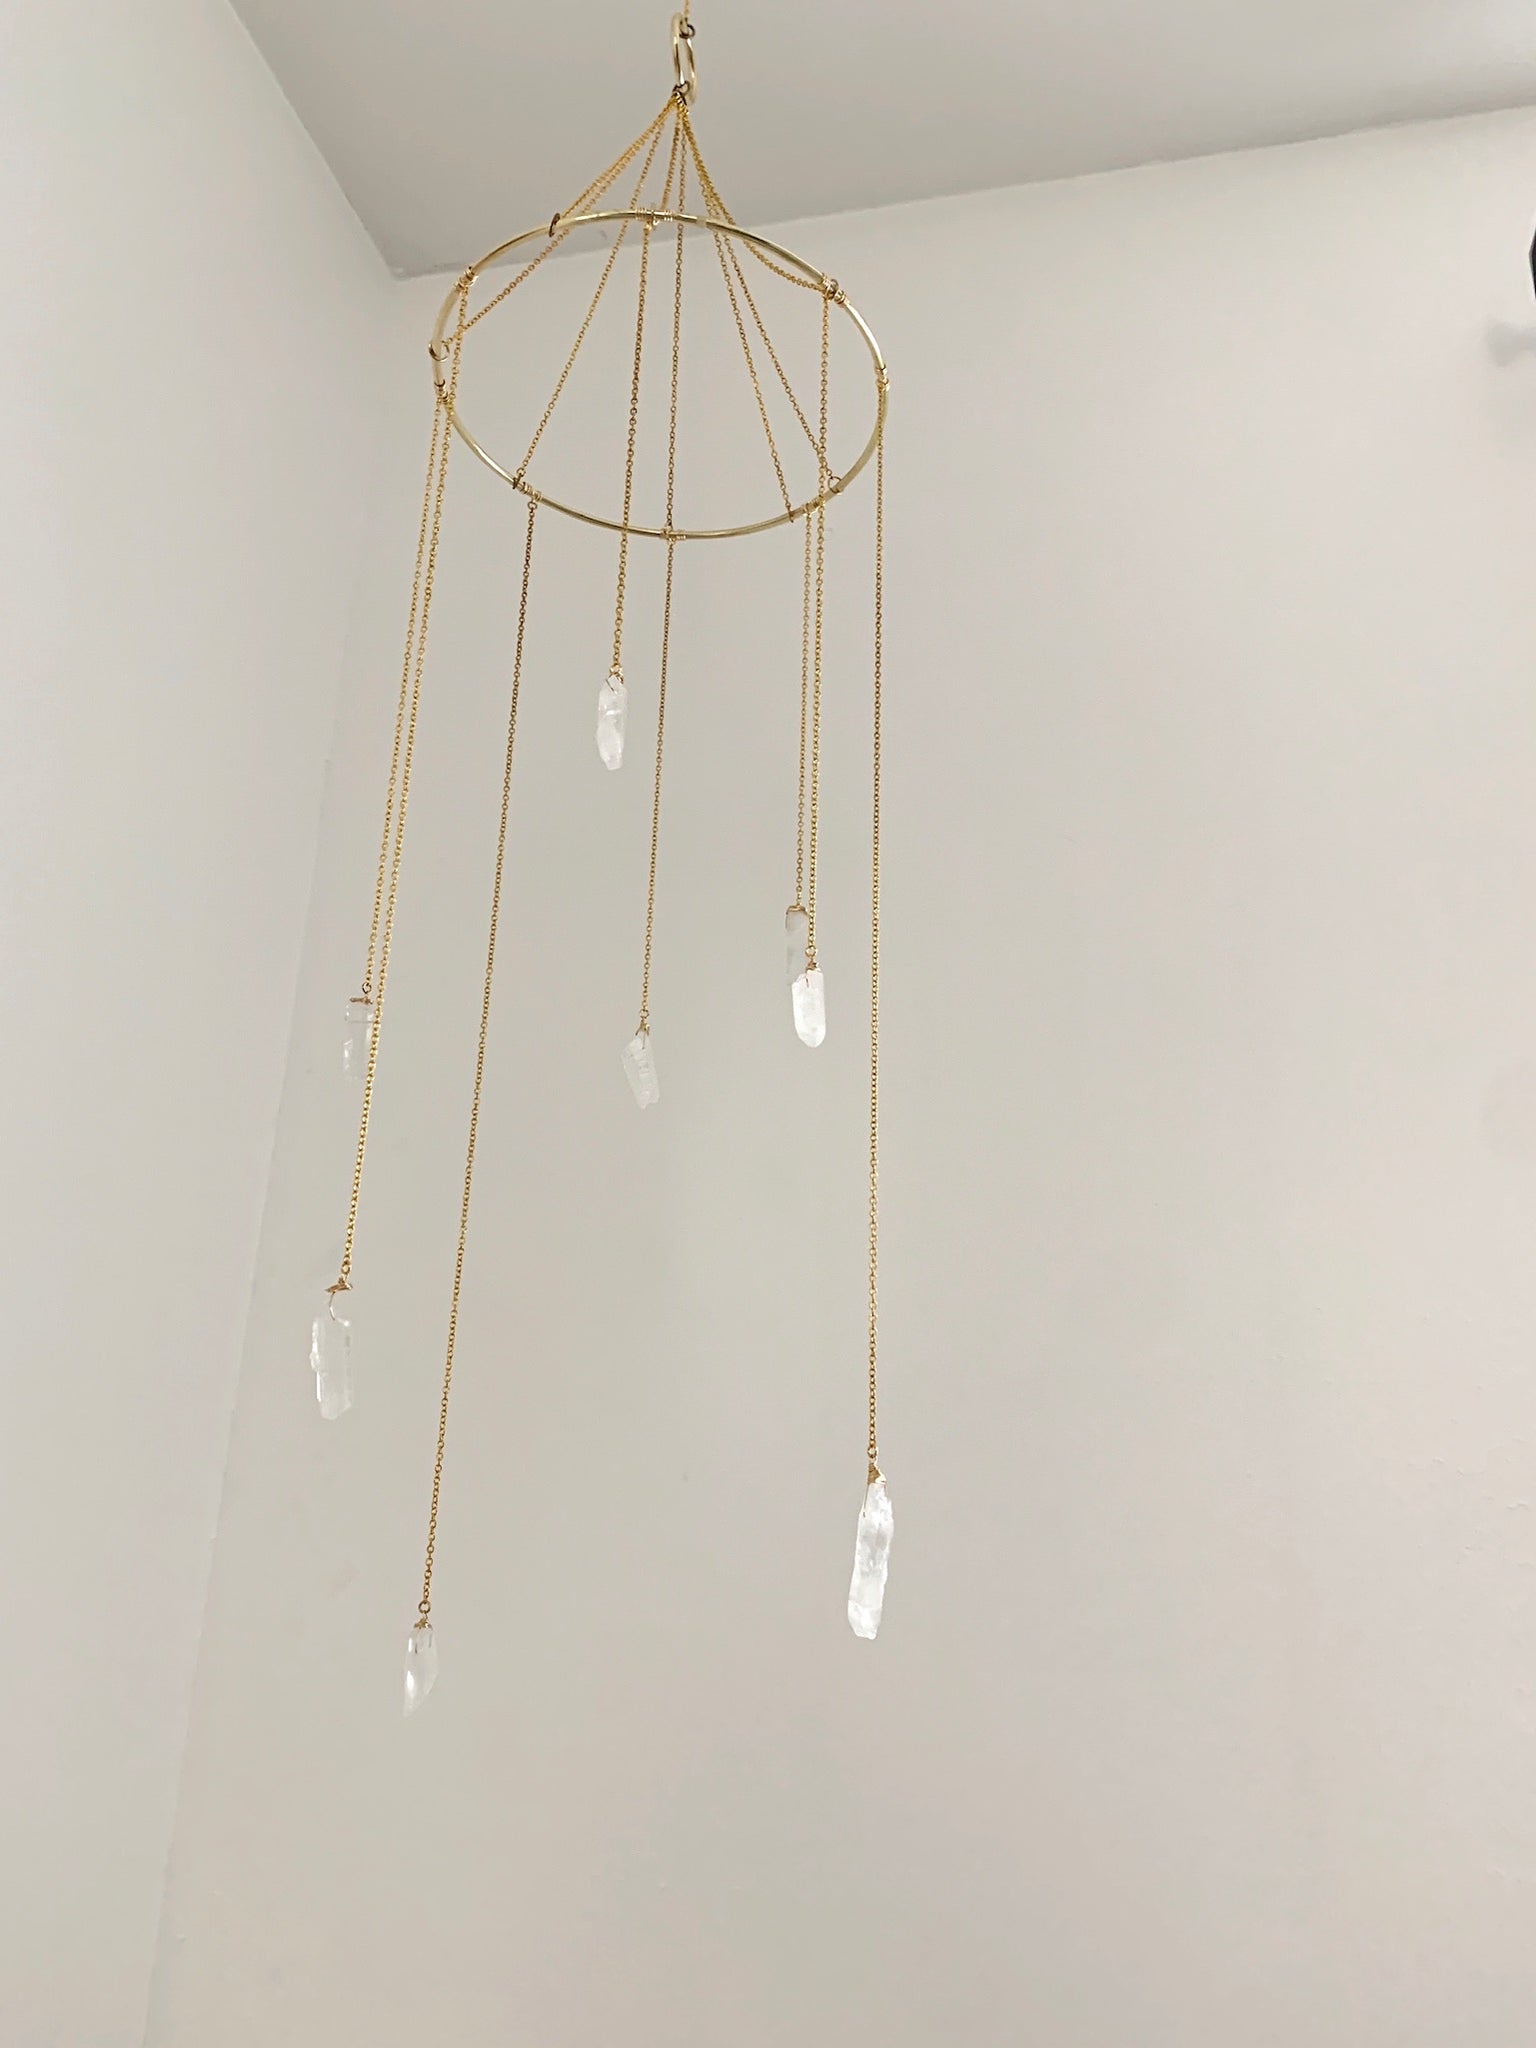 String of Crystals Home Decor – Elise Marie DeSigns